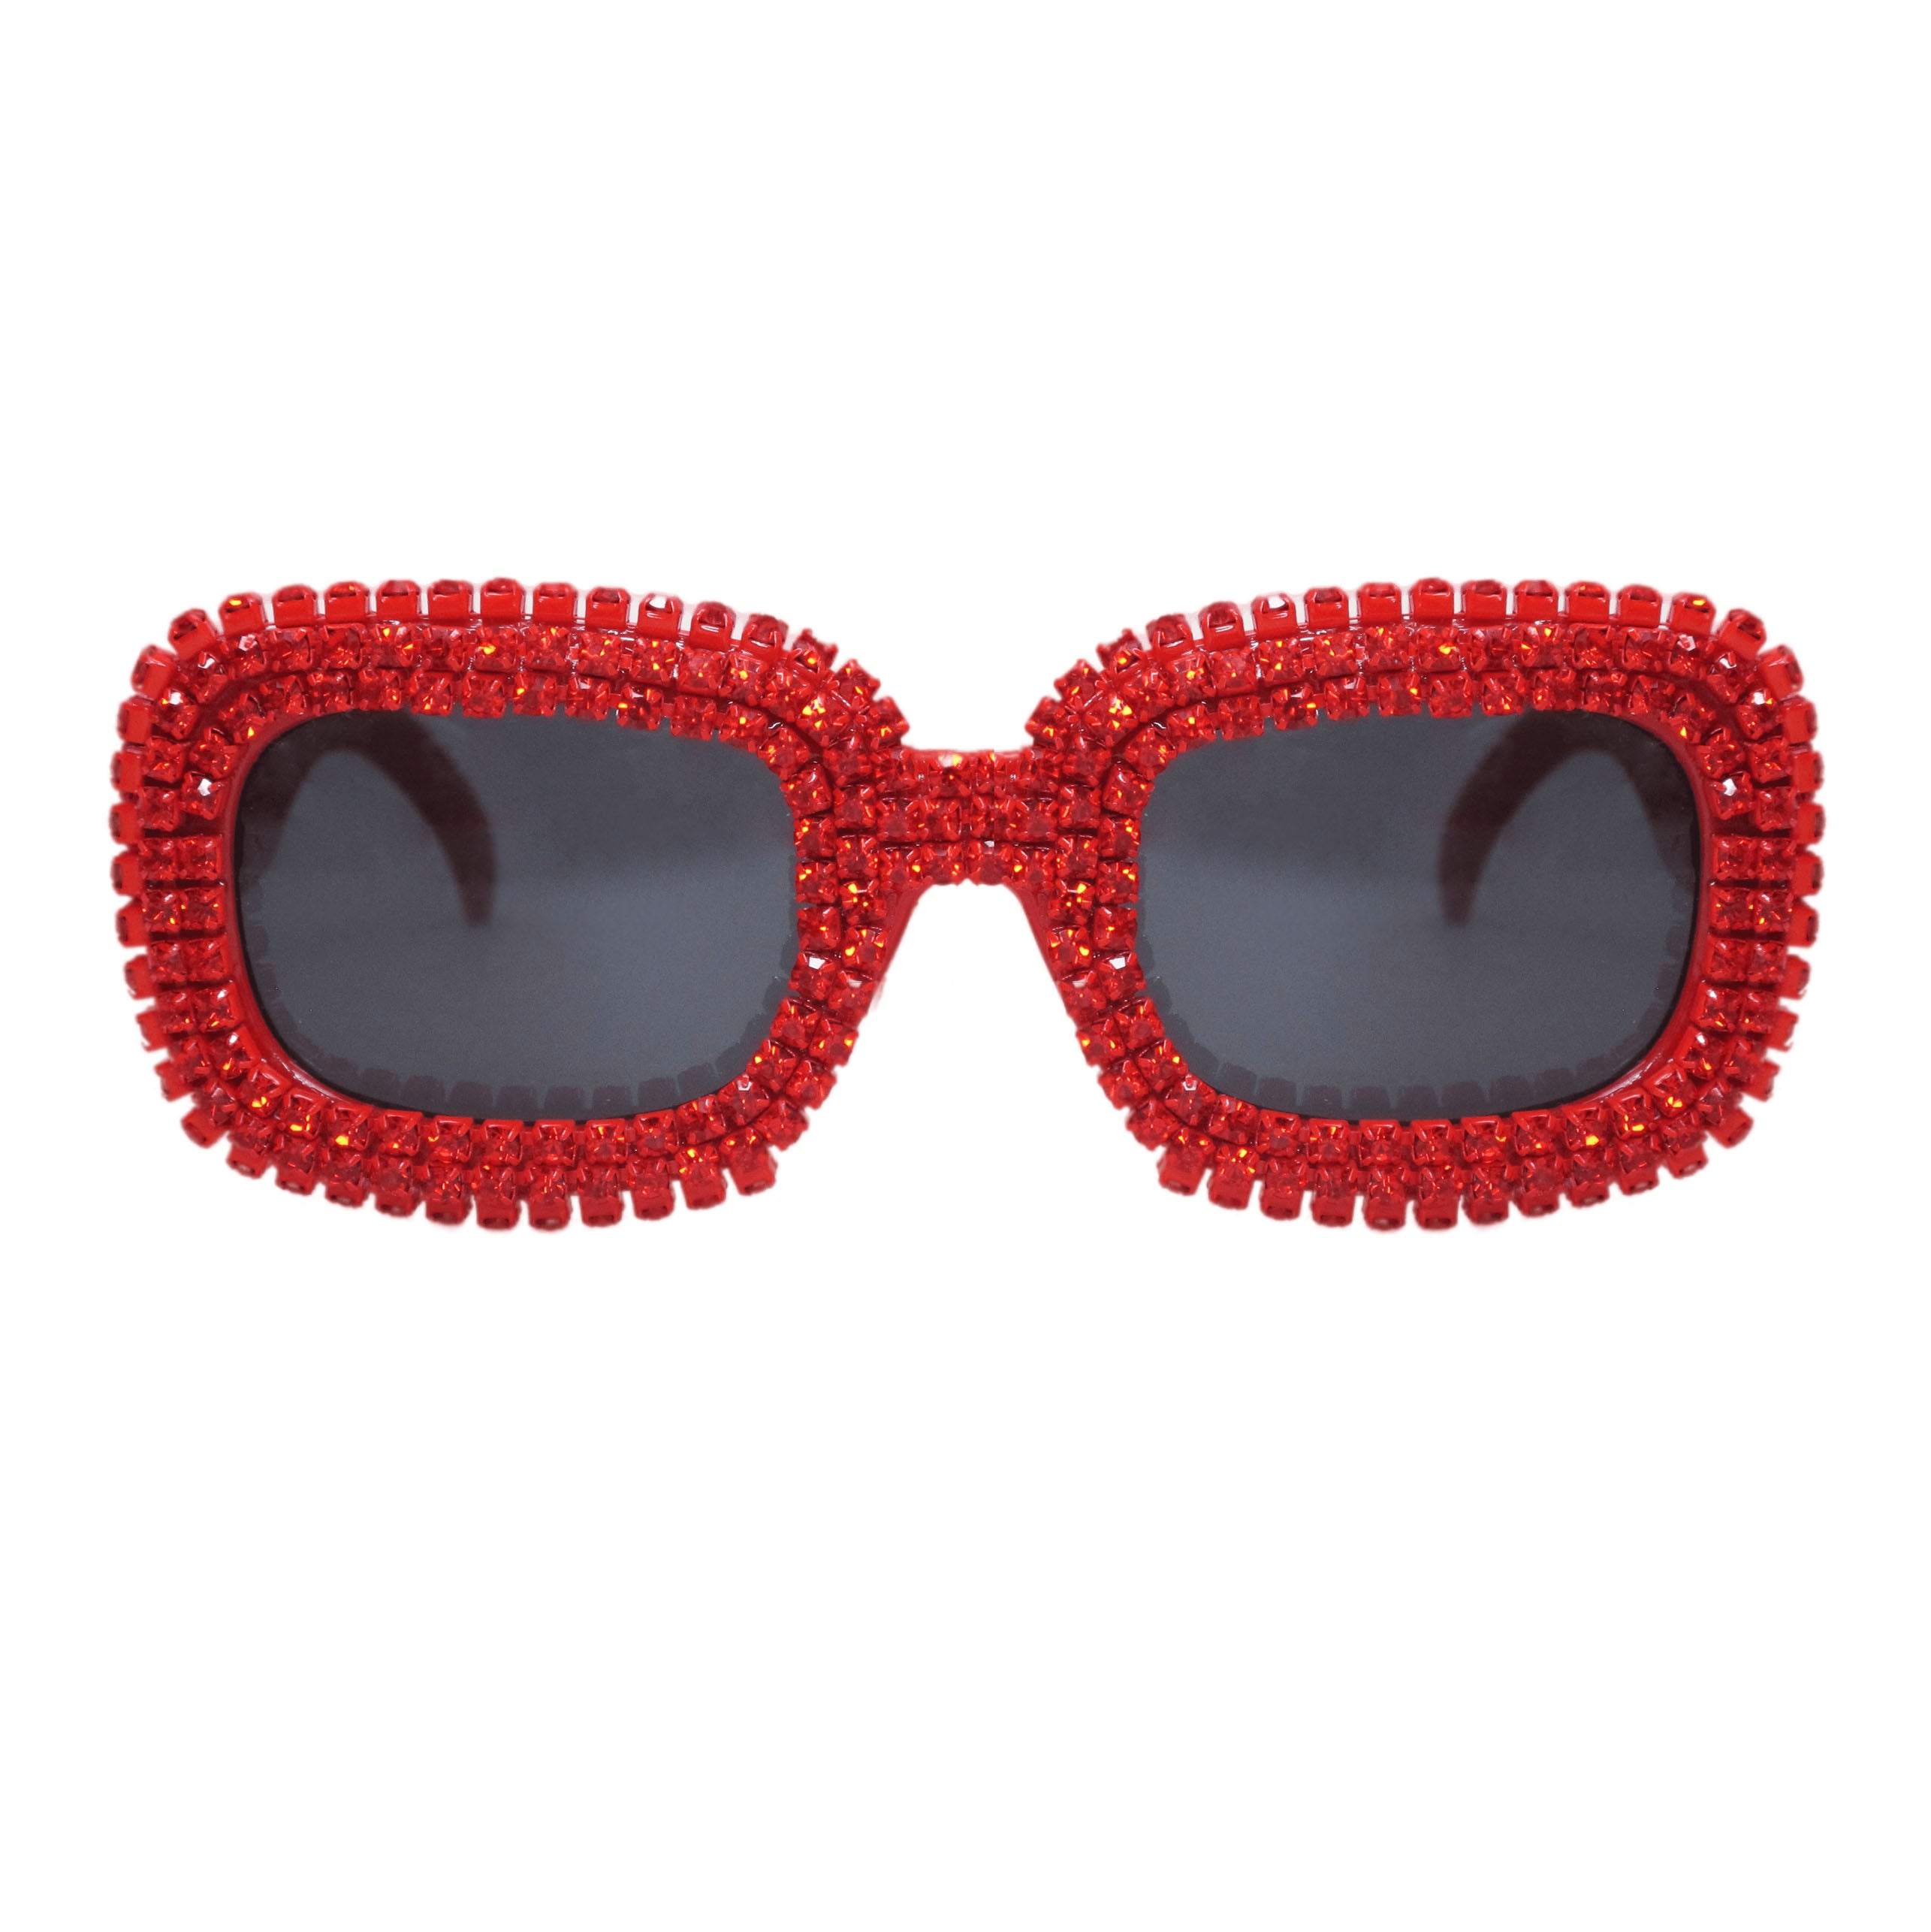 A-Morir | The Original Embellished Eyewear And Accessories